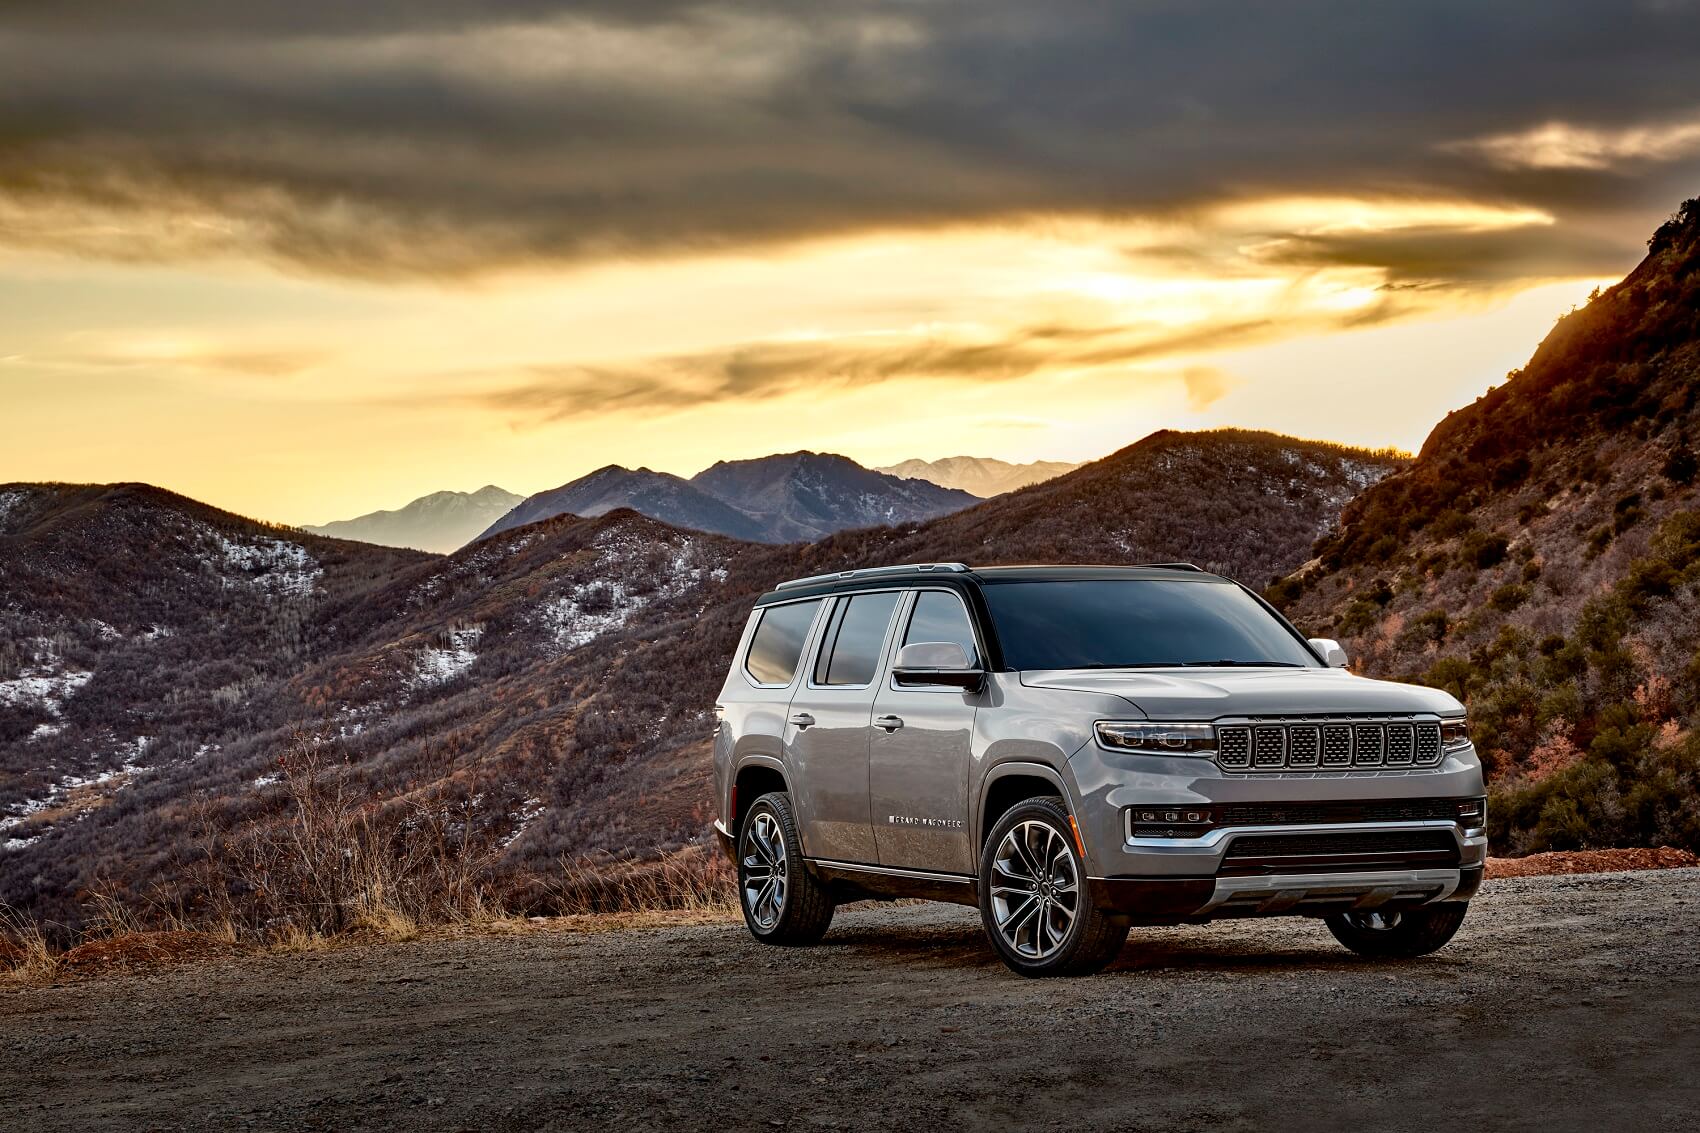 2022 Jeep Grand Wagoneer Silver in Mountains